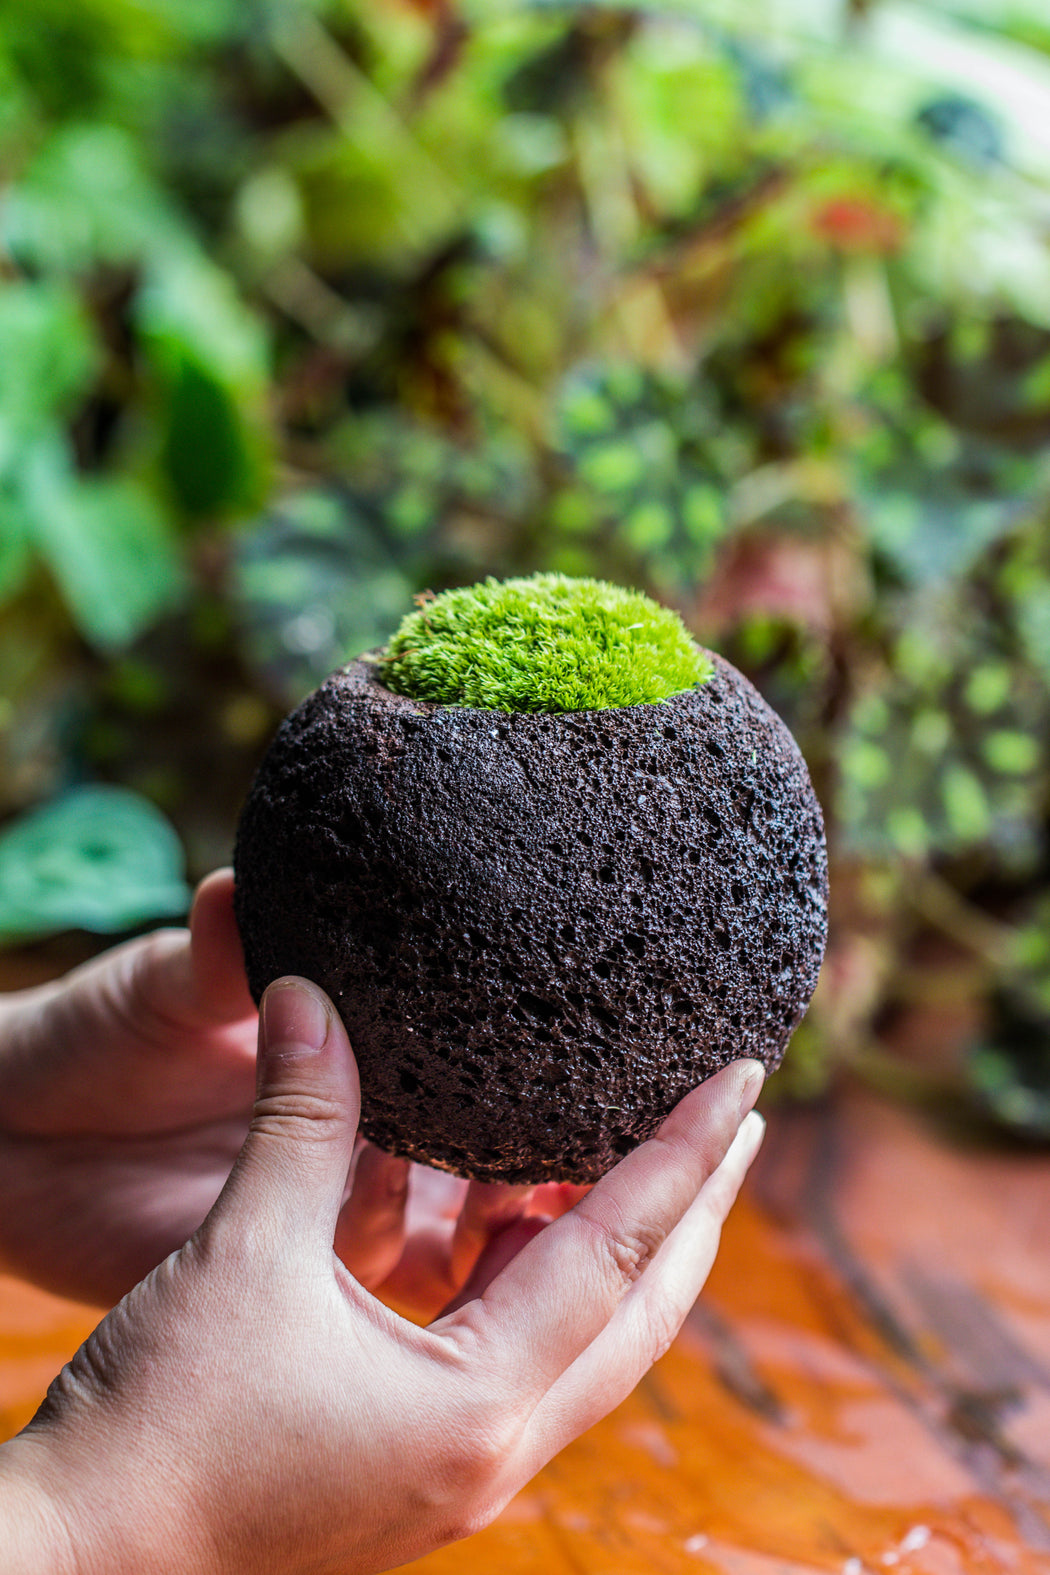 DIY set 10cm / 3.7" Round Horticultural Lava Rock Volcanic Rock Planterwith moss building kit - NCYPgarden